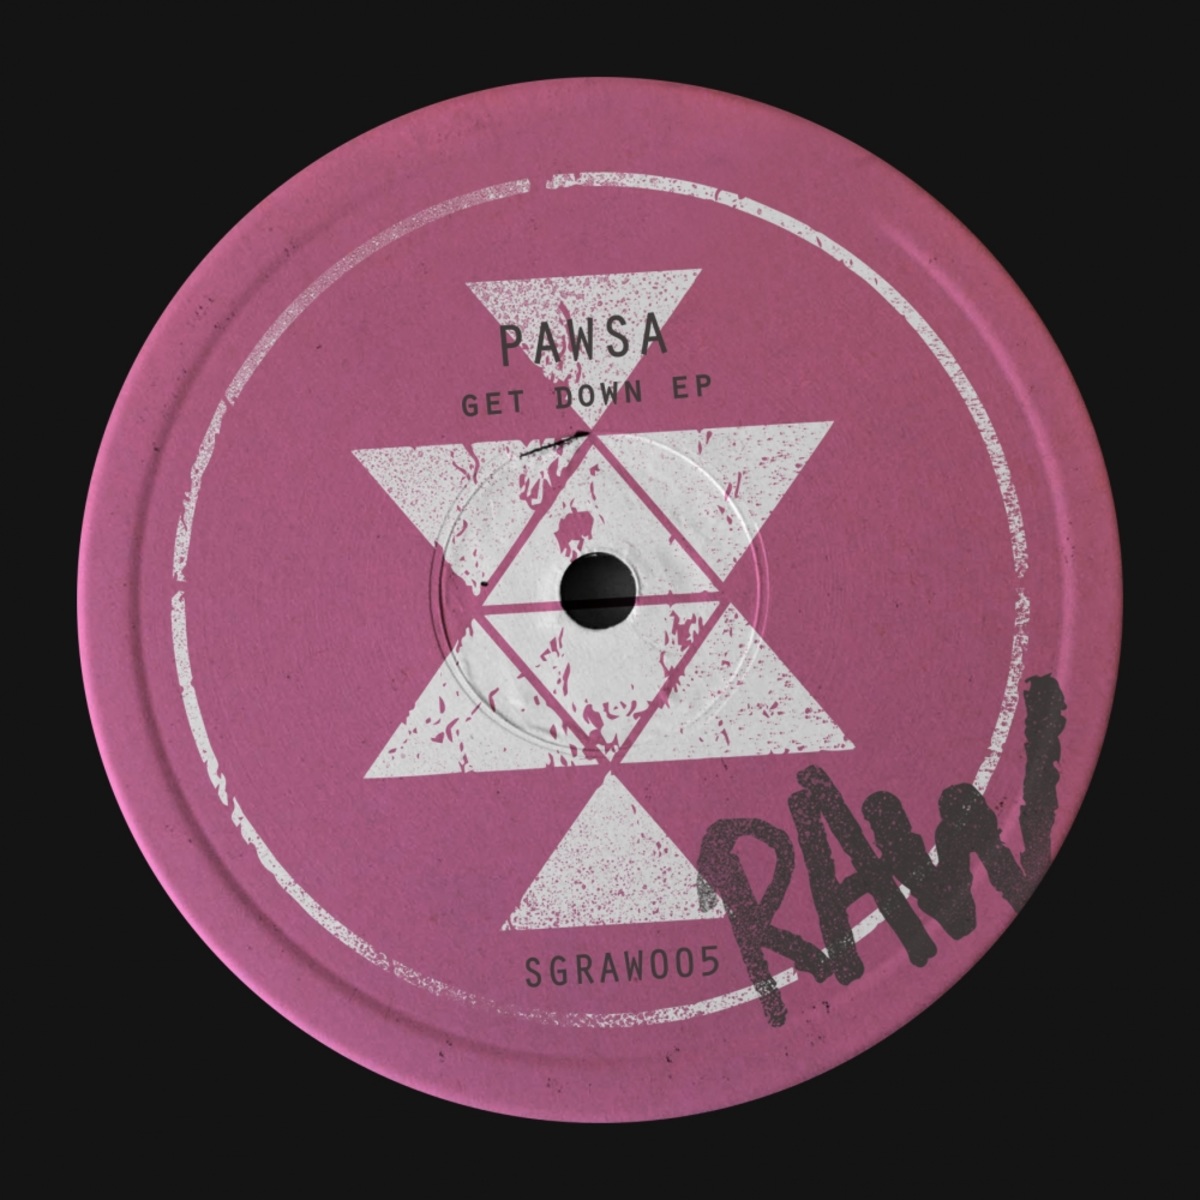 PAWSA - Get Down EP / Solid Grooves Raw